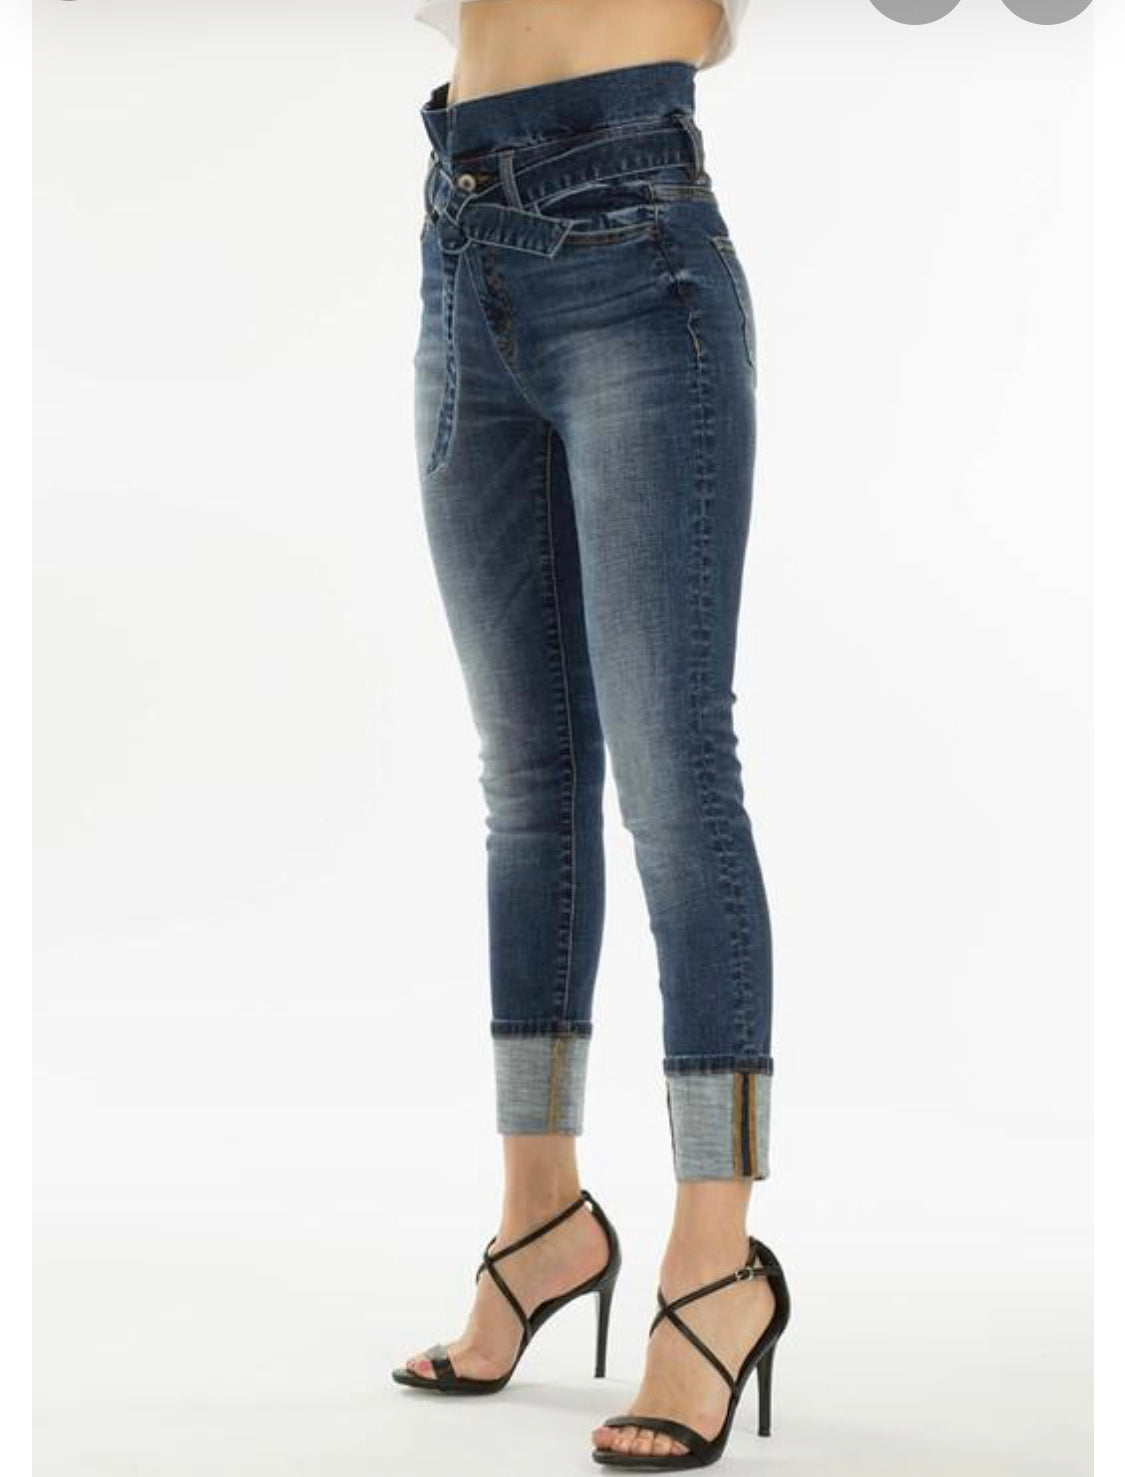 Sale- KanCan Paper Sack Jeans - Barbed Wire & Lace Boutique 